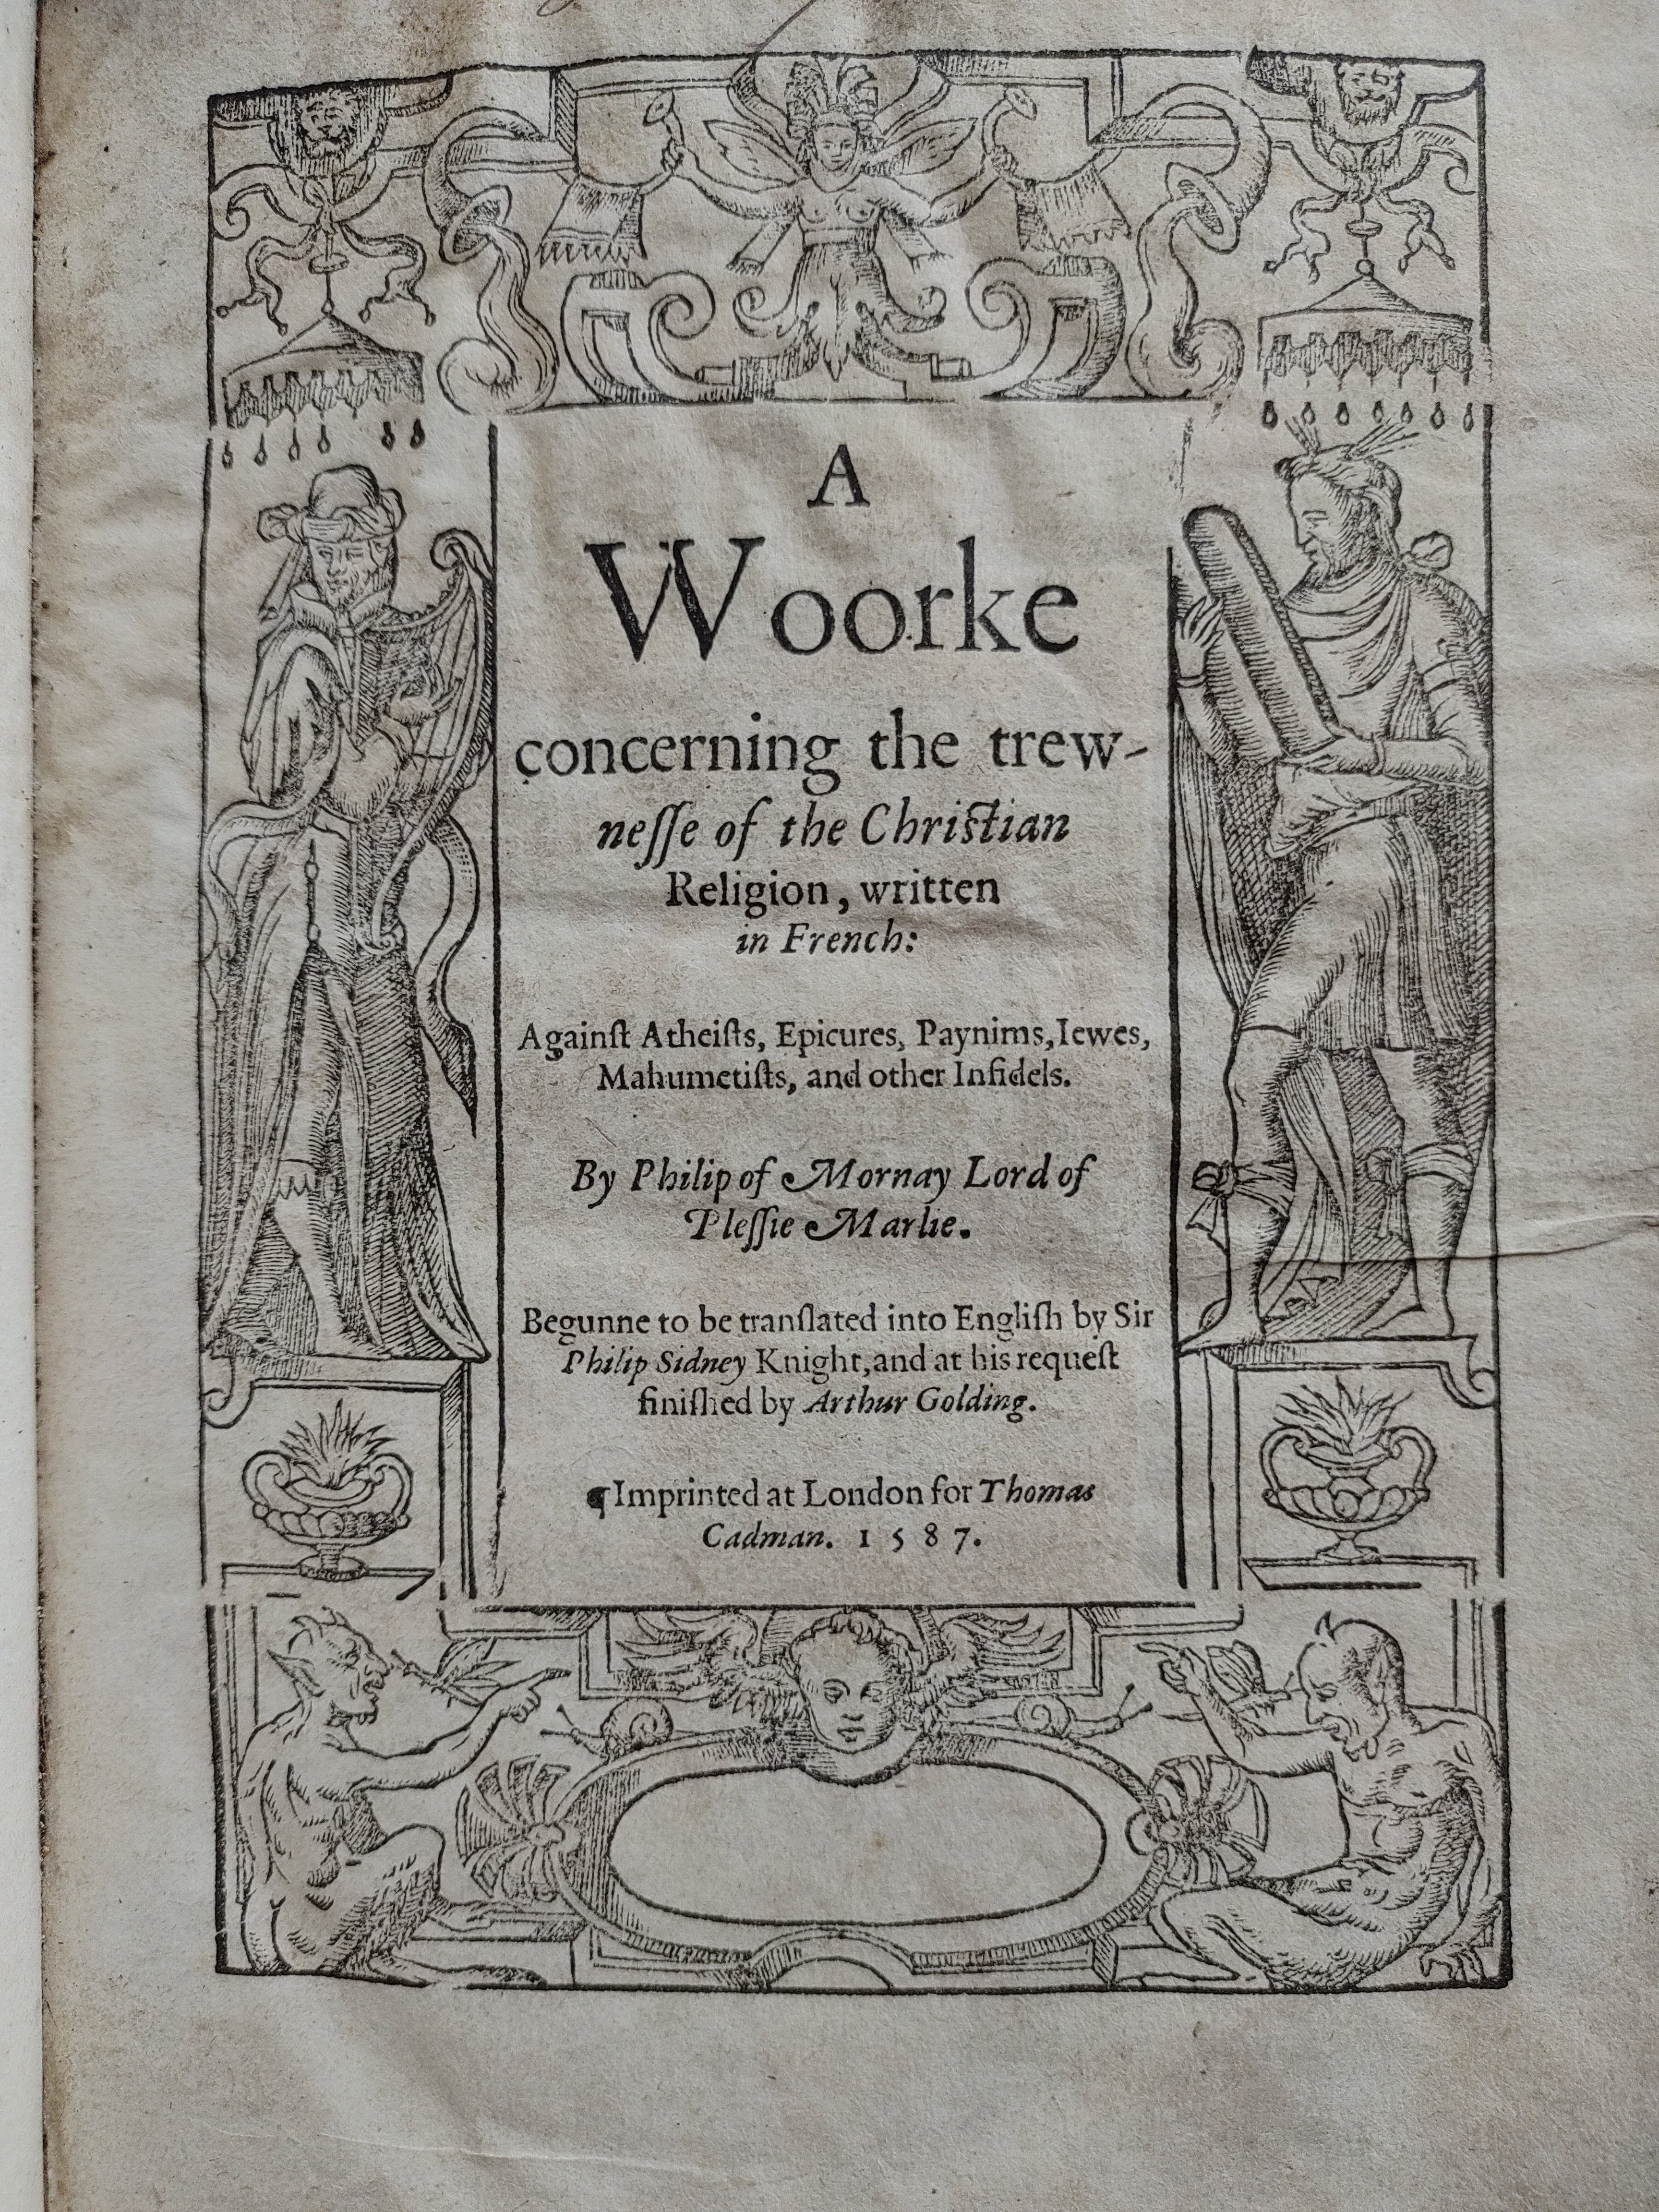 Title page of one of Philippe de Mornay's book